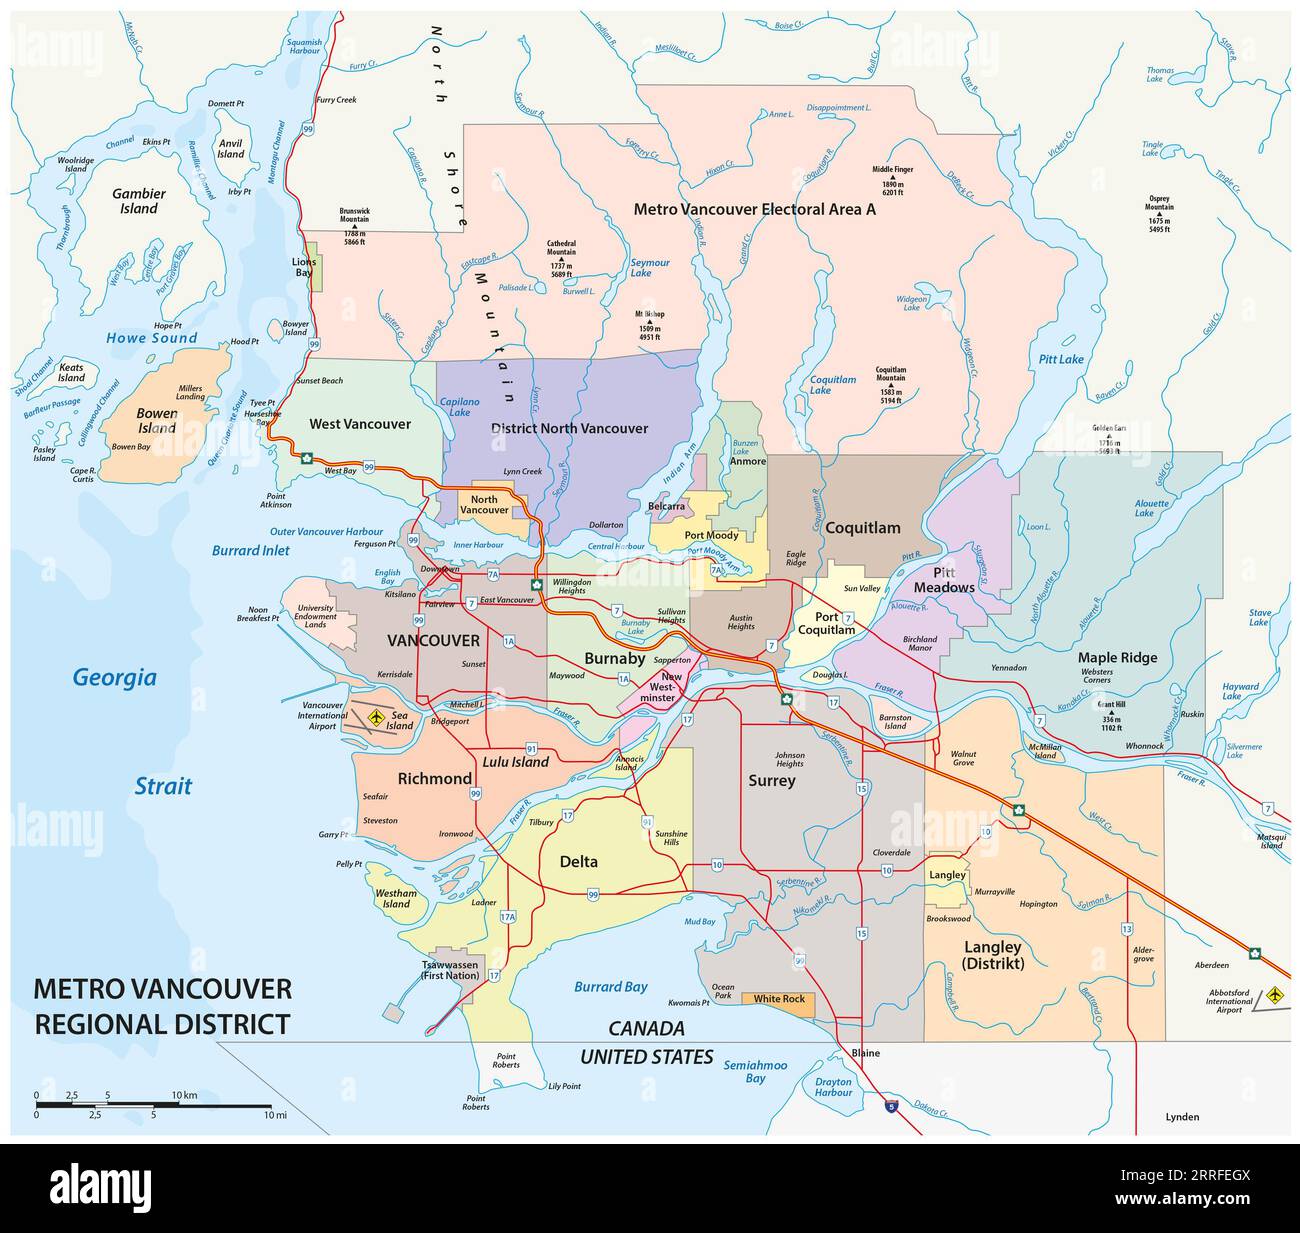 Road map of Metro Vancouver Regional District, Canada Stock Photo